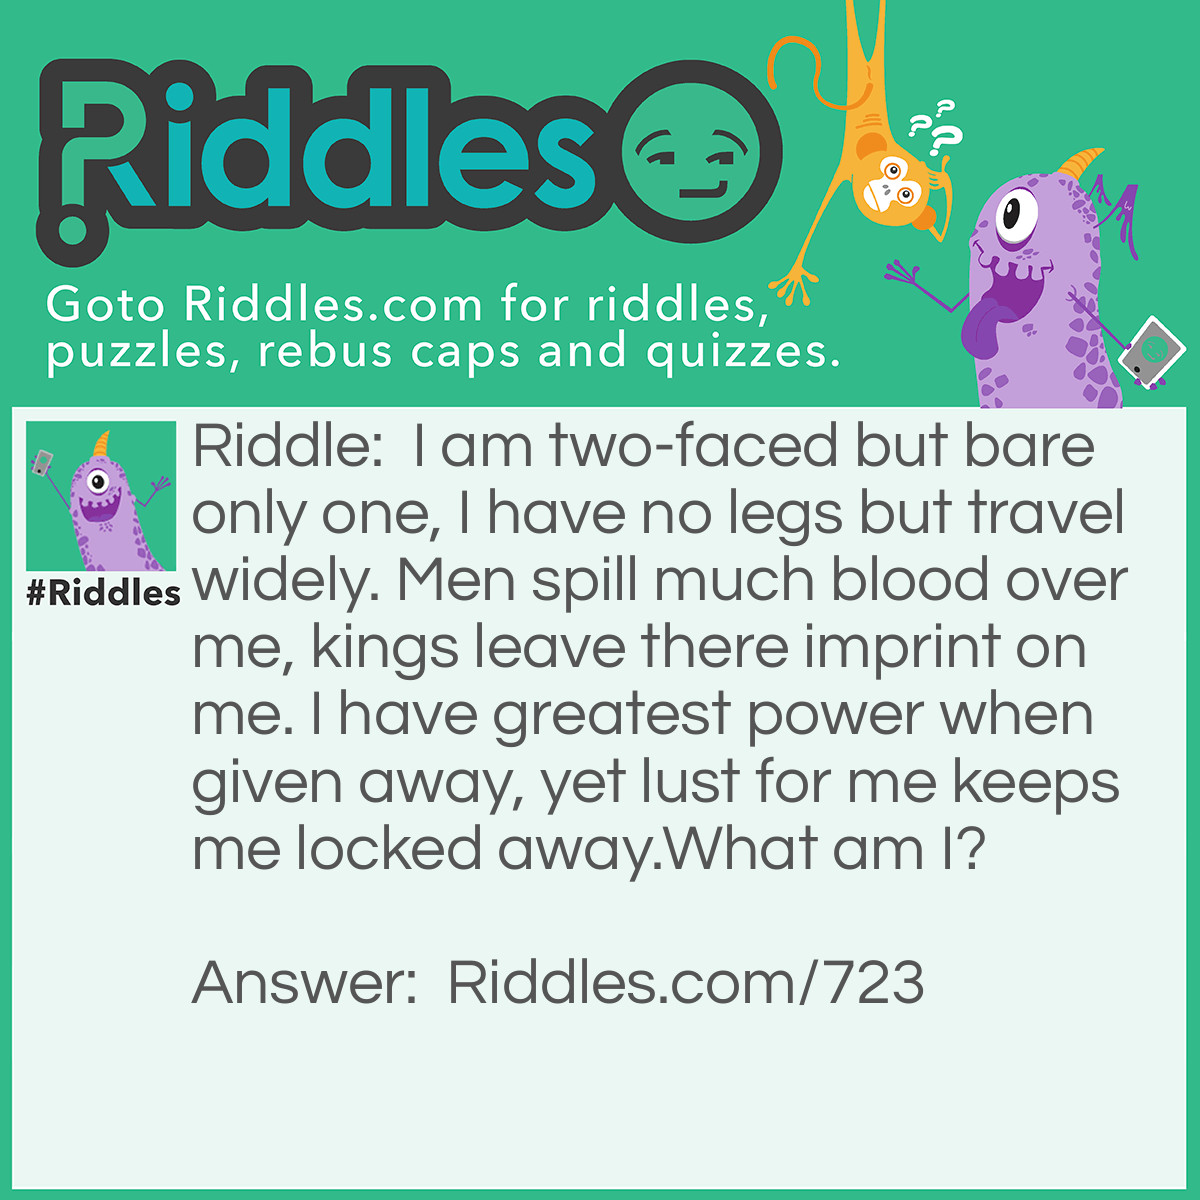 Riddle: I am two-faced but bare only one, I have no legs but travel widely. Men spill much blood over me, kings leave there imprint on me. I have <a href="https://www.riddles.com/best-riddles">greatest</a> power when given away, yet lust for me keeps me locked away.
What am I? Answer: A Coin.